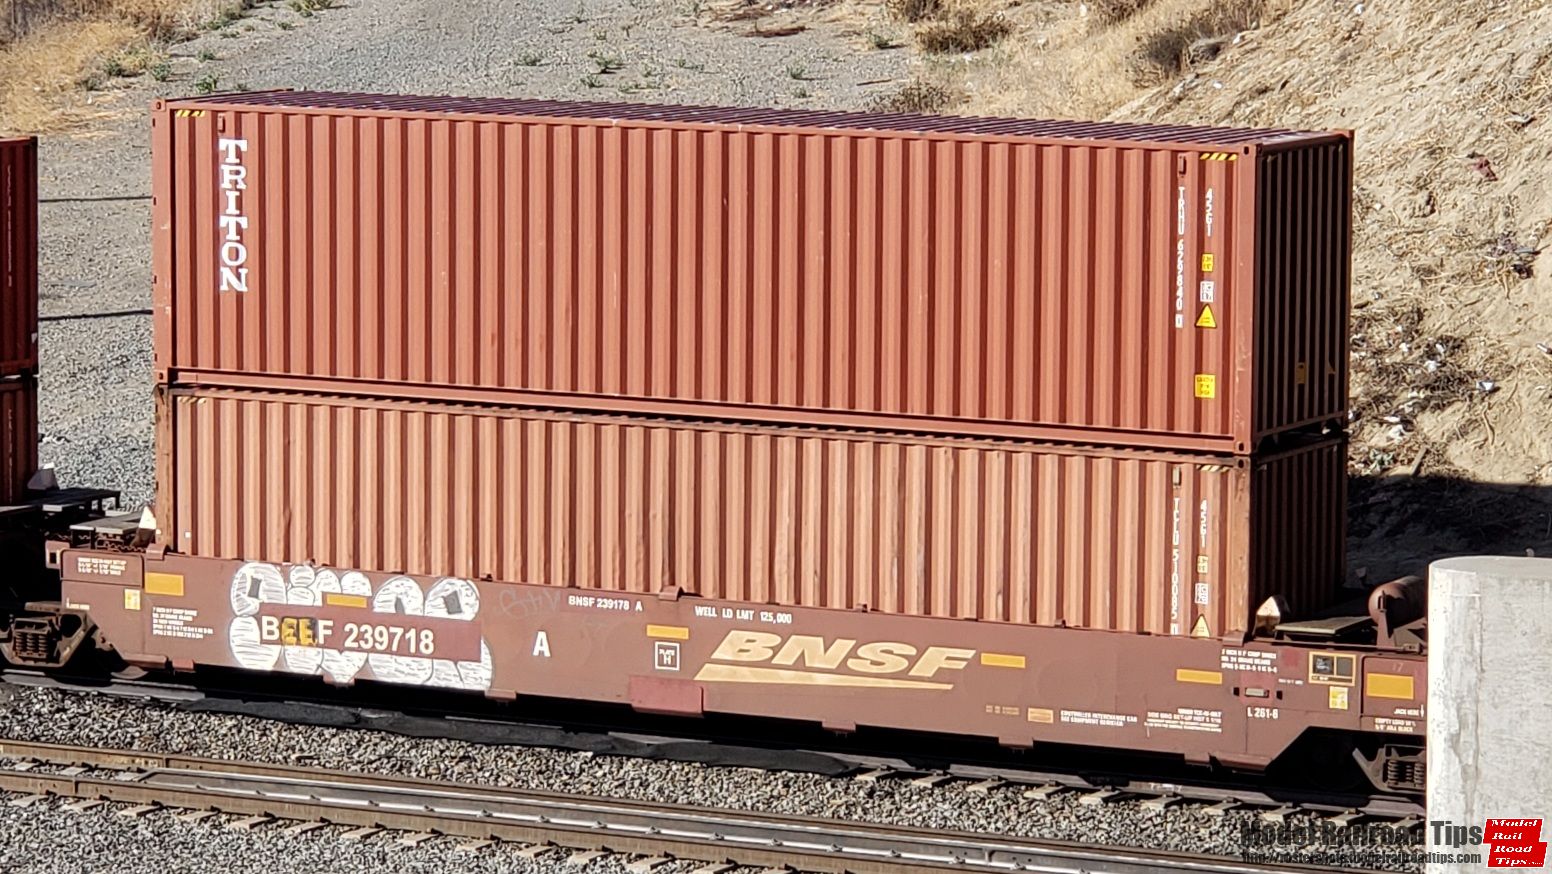 BEEF (BNSF) 239718
BNSF 239718
Has some funny graffiti "BEEF"
Maxi-I five unit 40' well intermodal car 
2 October 2021
Pepper Ave overpass 
West Colton CA 
